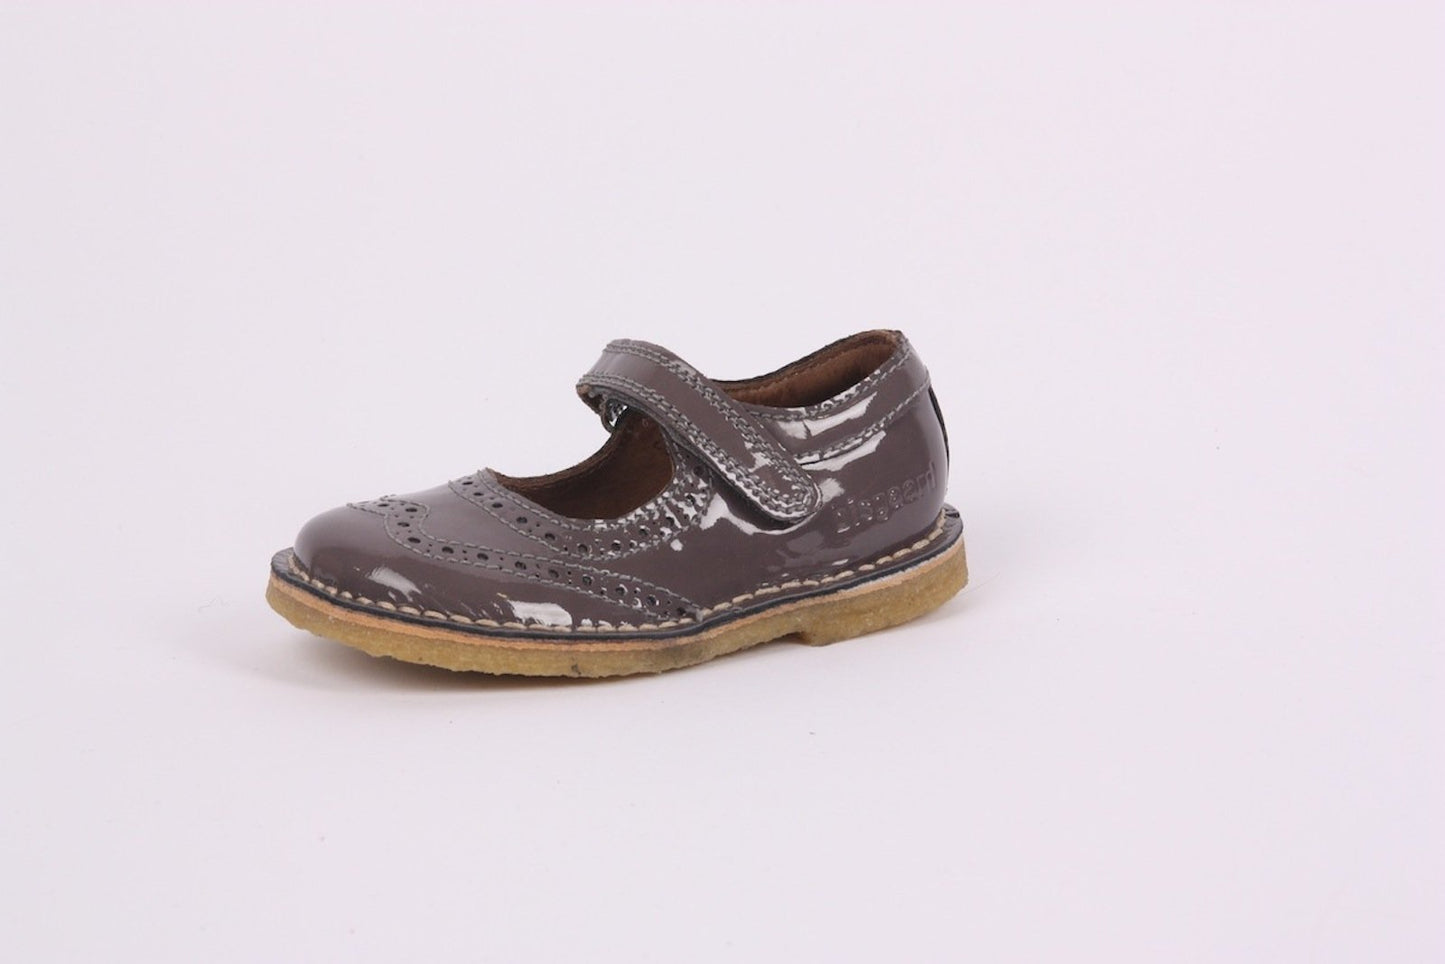 Bisgaard Mouse Brogue Patent Mary Janes